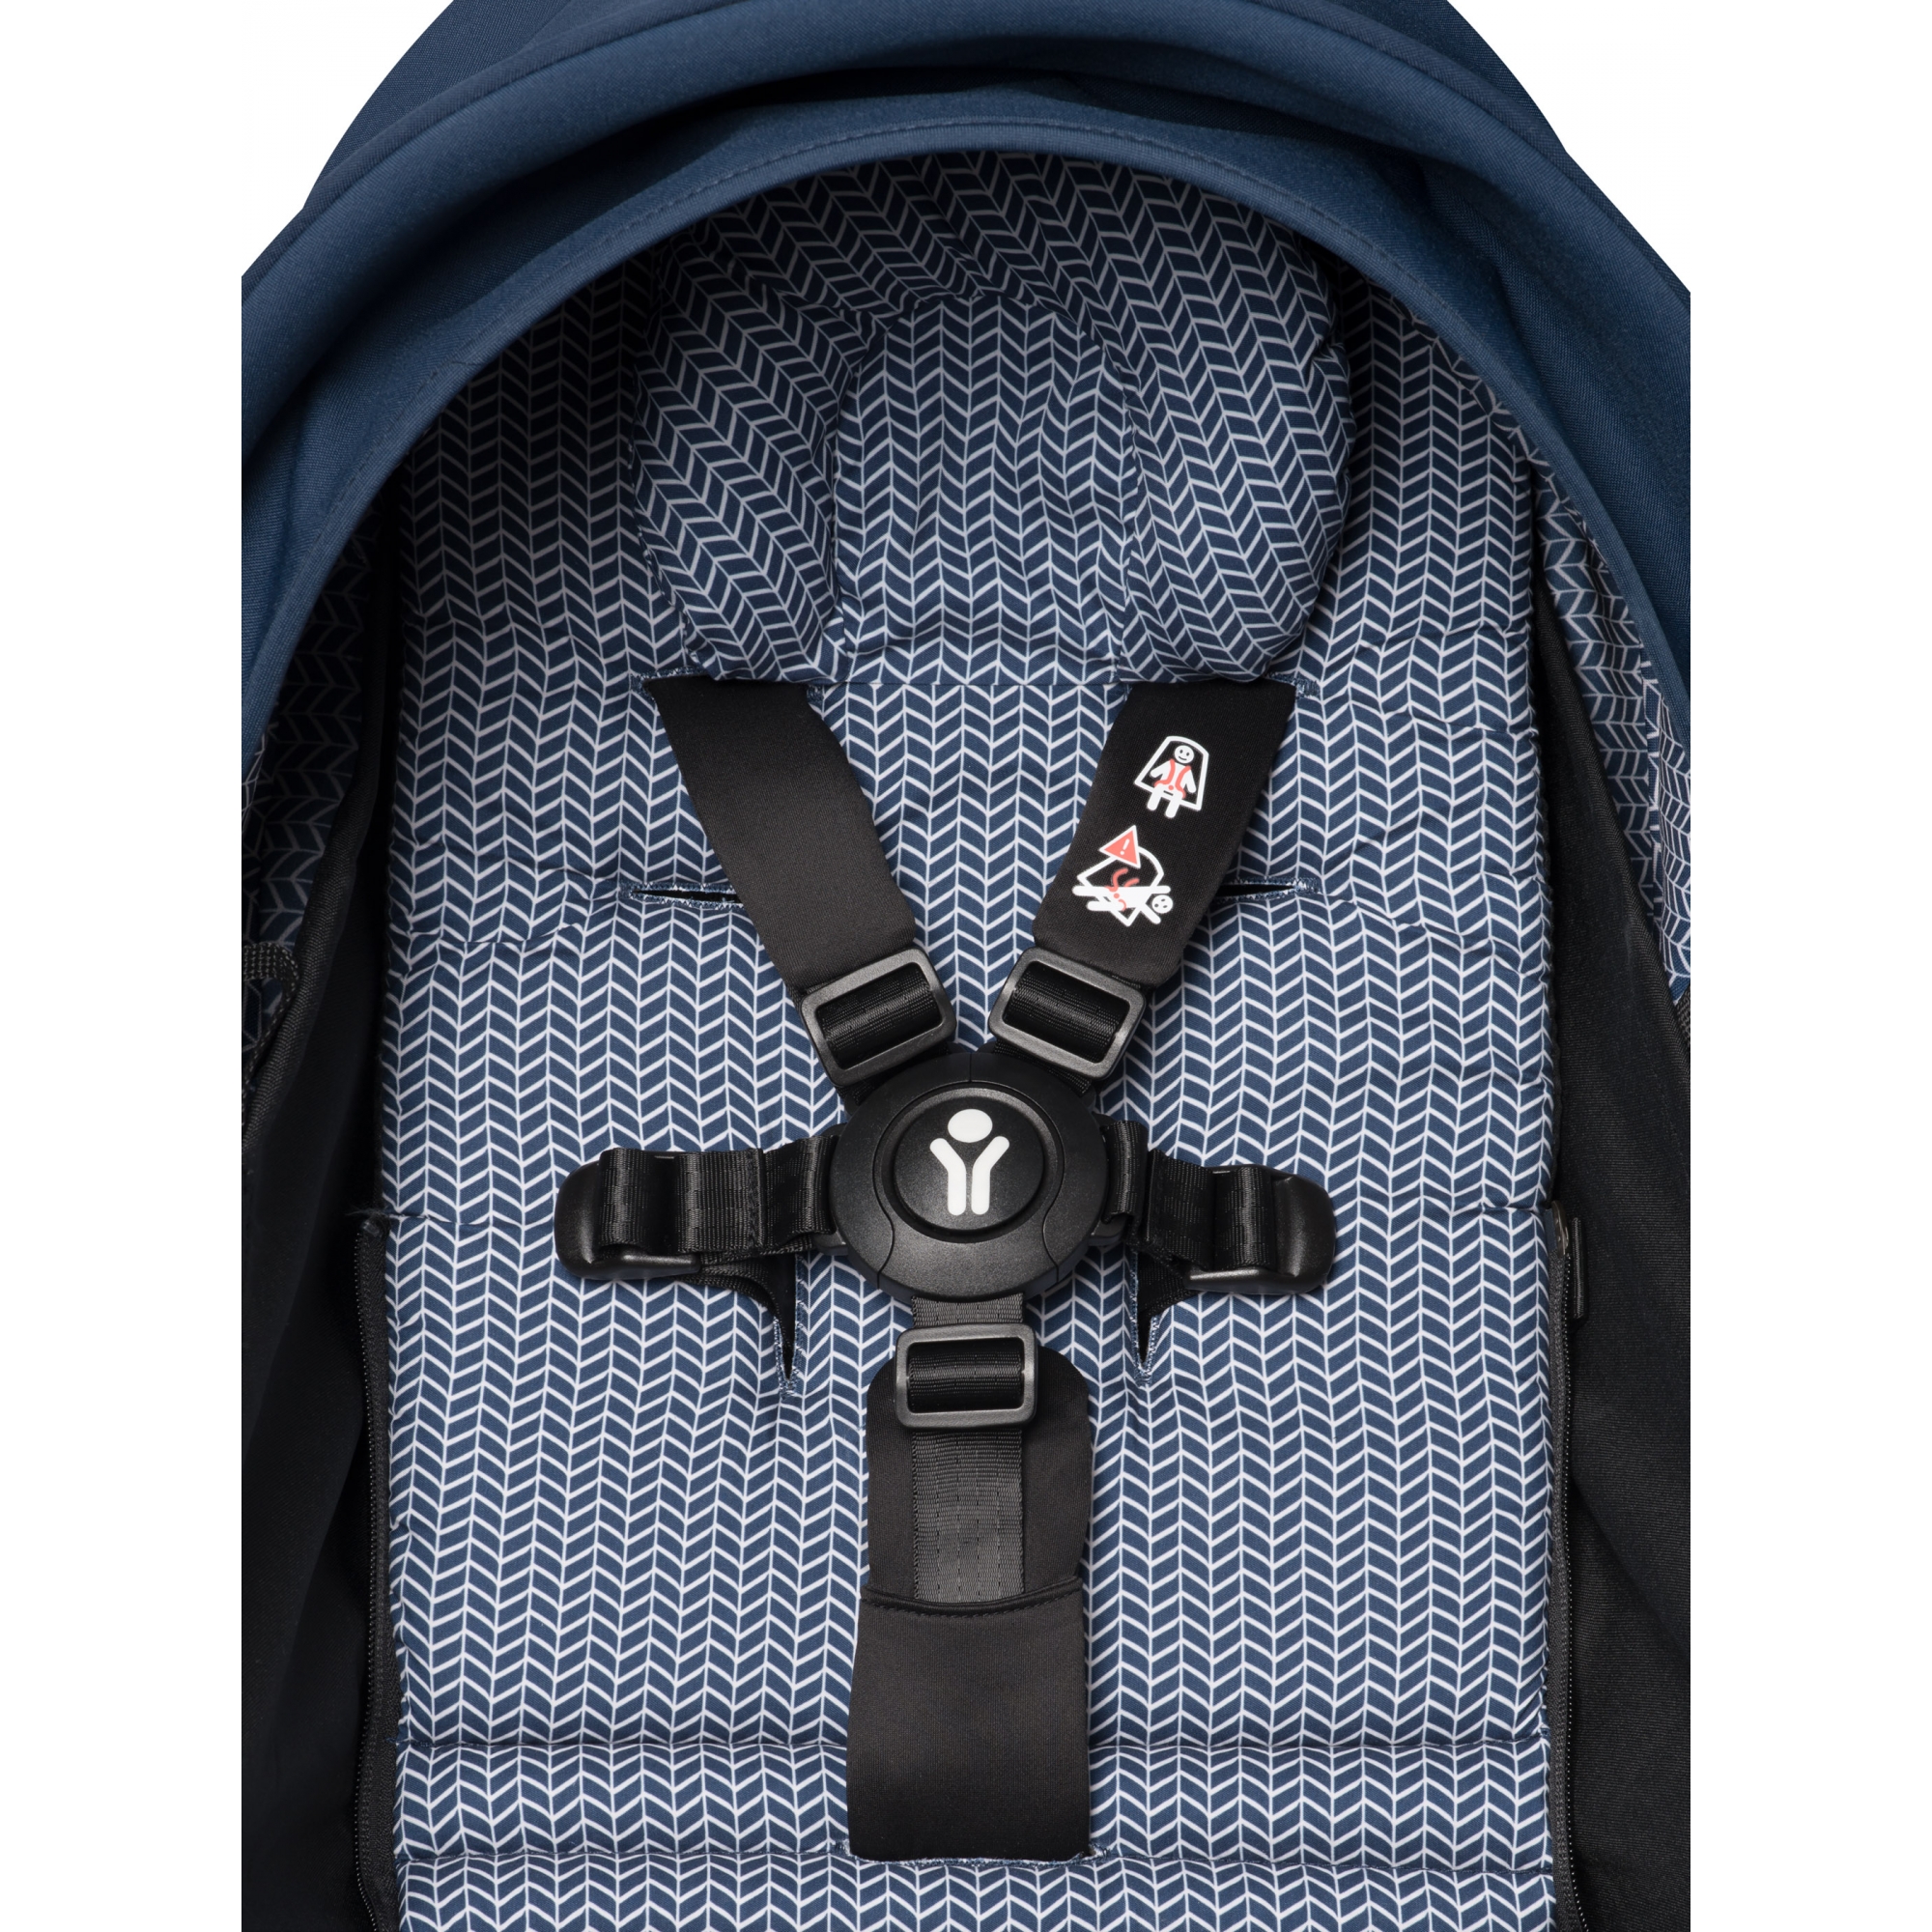 Pack poussette double Trio YOYO² Connect pack 6+ + Yoyo car seat by Besafe  + Nacelle - Cadre Blanc - Bleu Marine - Made in Bébé